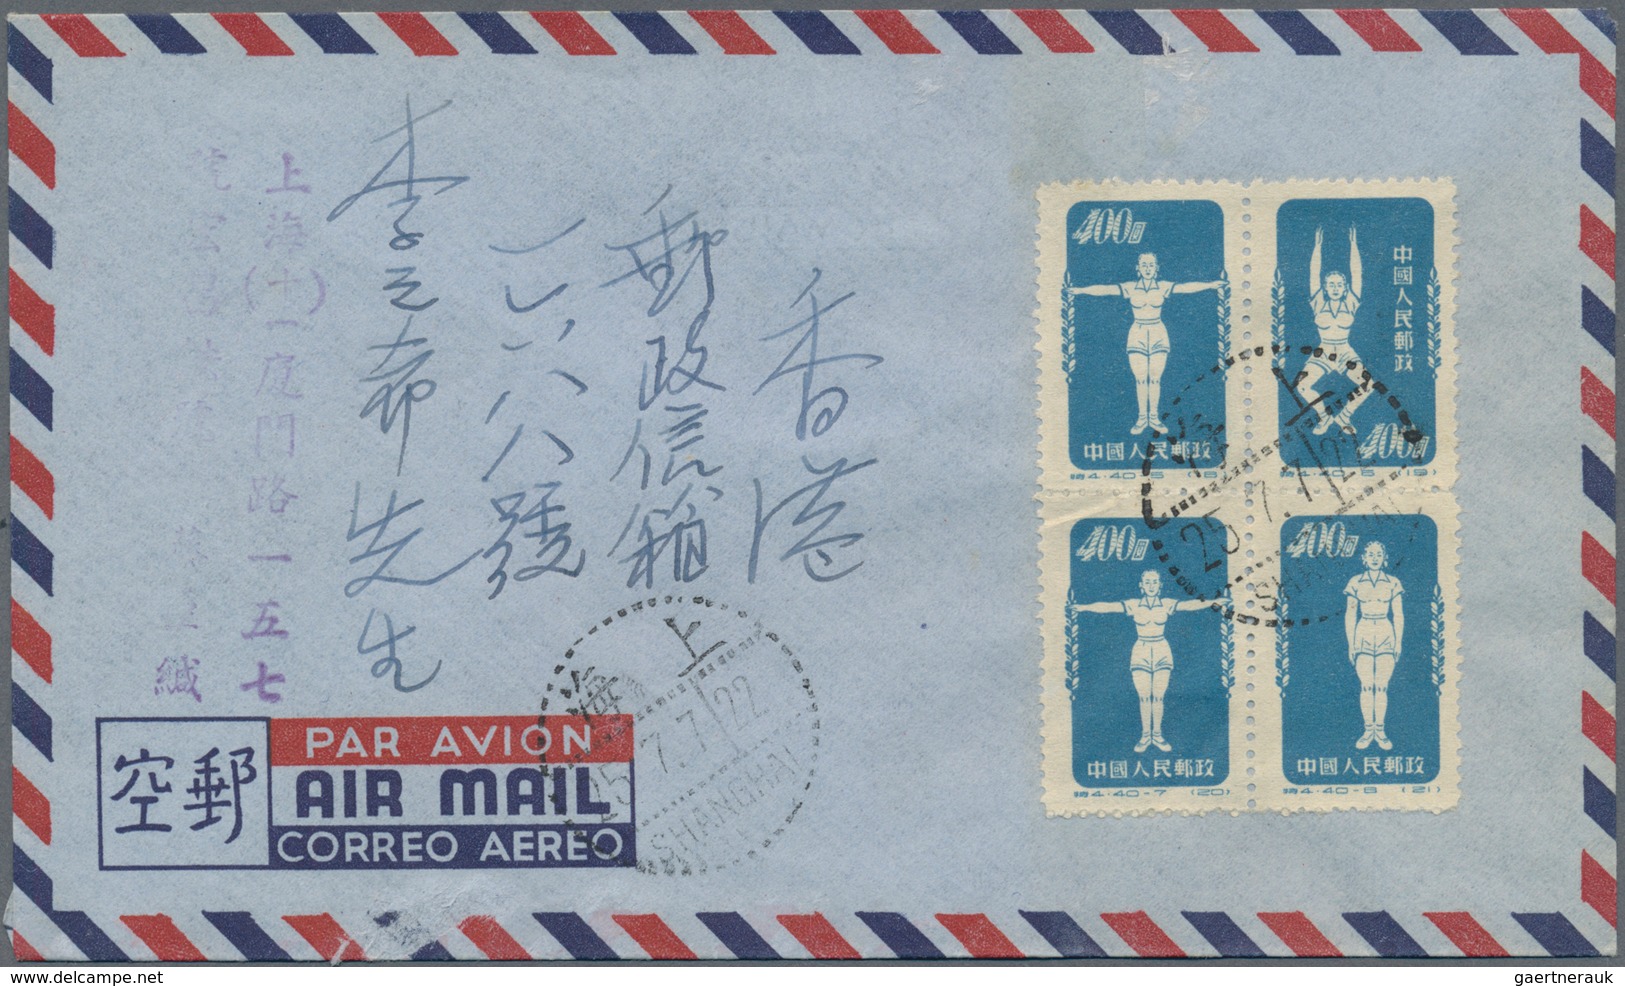 China - Volksrepublik: 1952, 10 covers addressed to Hong Kong, bearing the full set of Gymnatics by